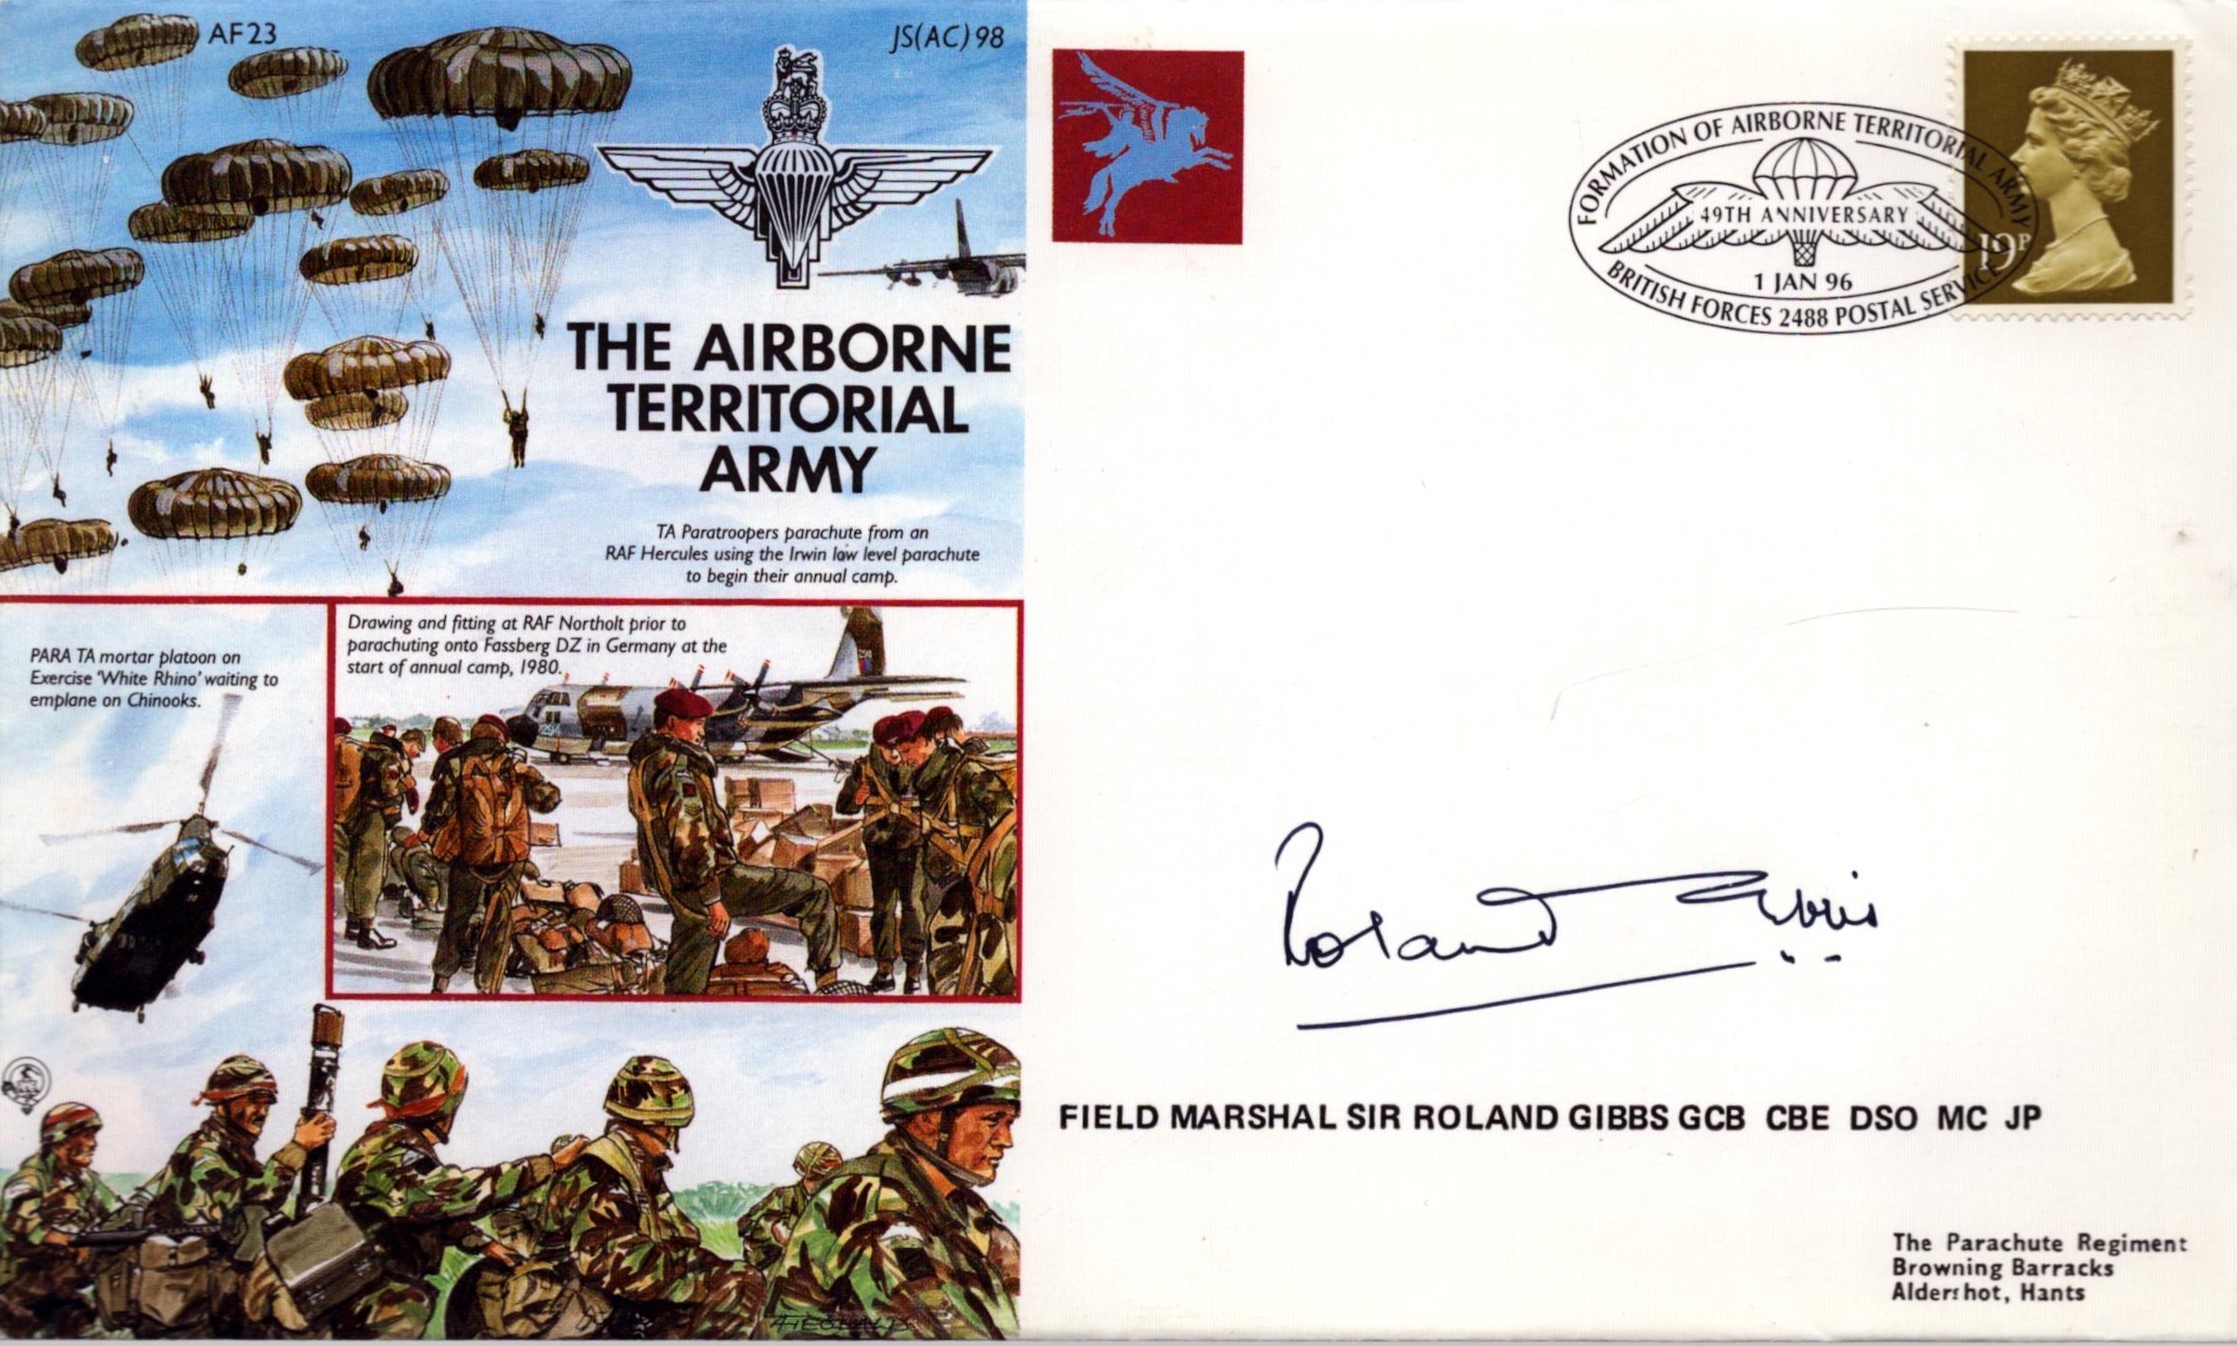 Field Marshal Sir Roland Gibbs GCB CBE DSO MC JP signed The Airbourne Territorial Army commemorative